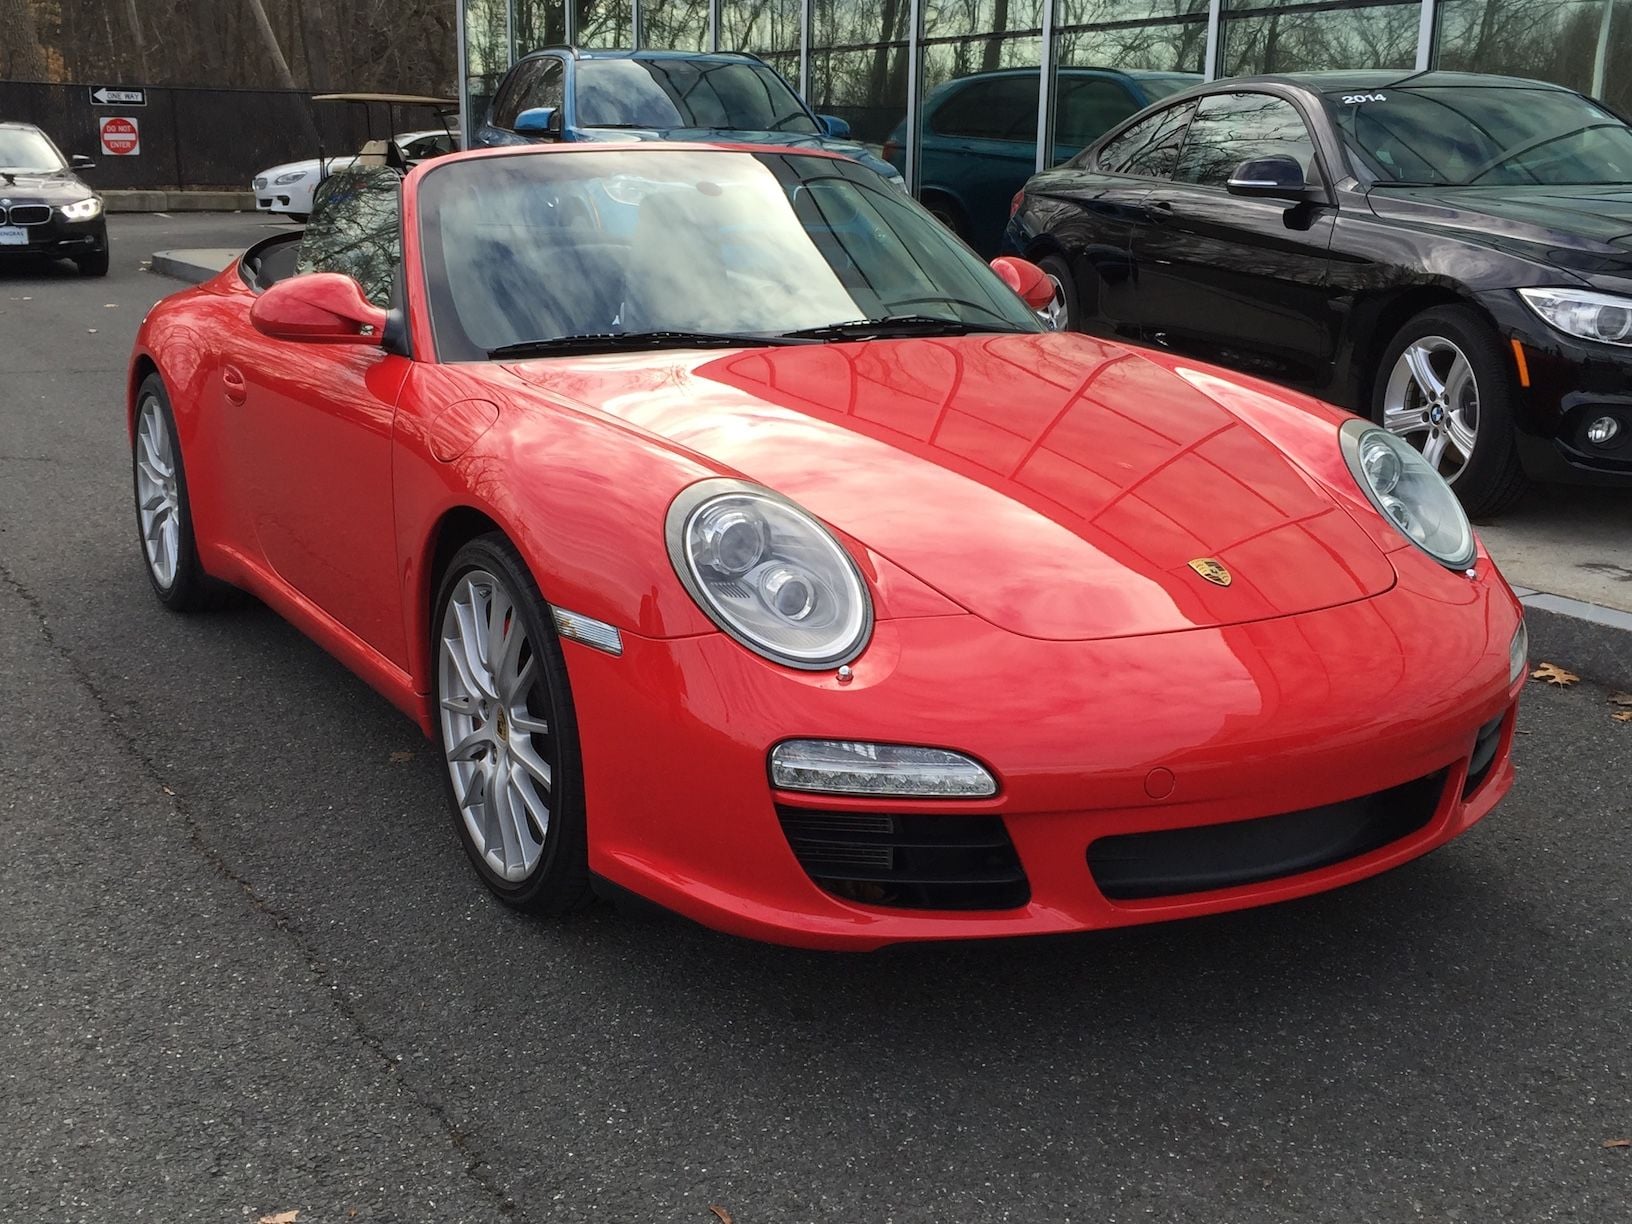 2009 Porsche 911 - 2009 911 Carrera S Cabriolet - Guards Red - Manual Transmission - Sport Chrono - Used - VIN WP0CB29949S754735 - 6 cyl - 2WD - Manual - Convertible - Red - Alexandria, VA 22314, United States